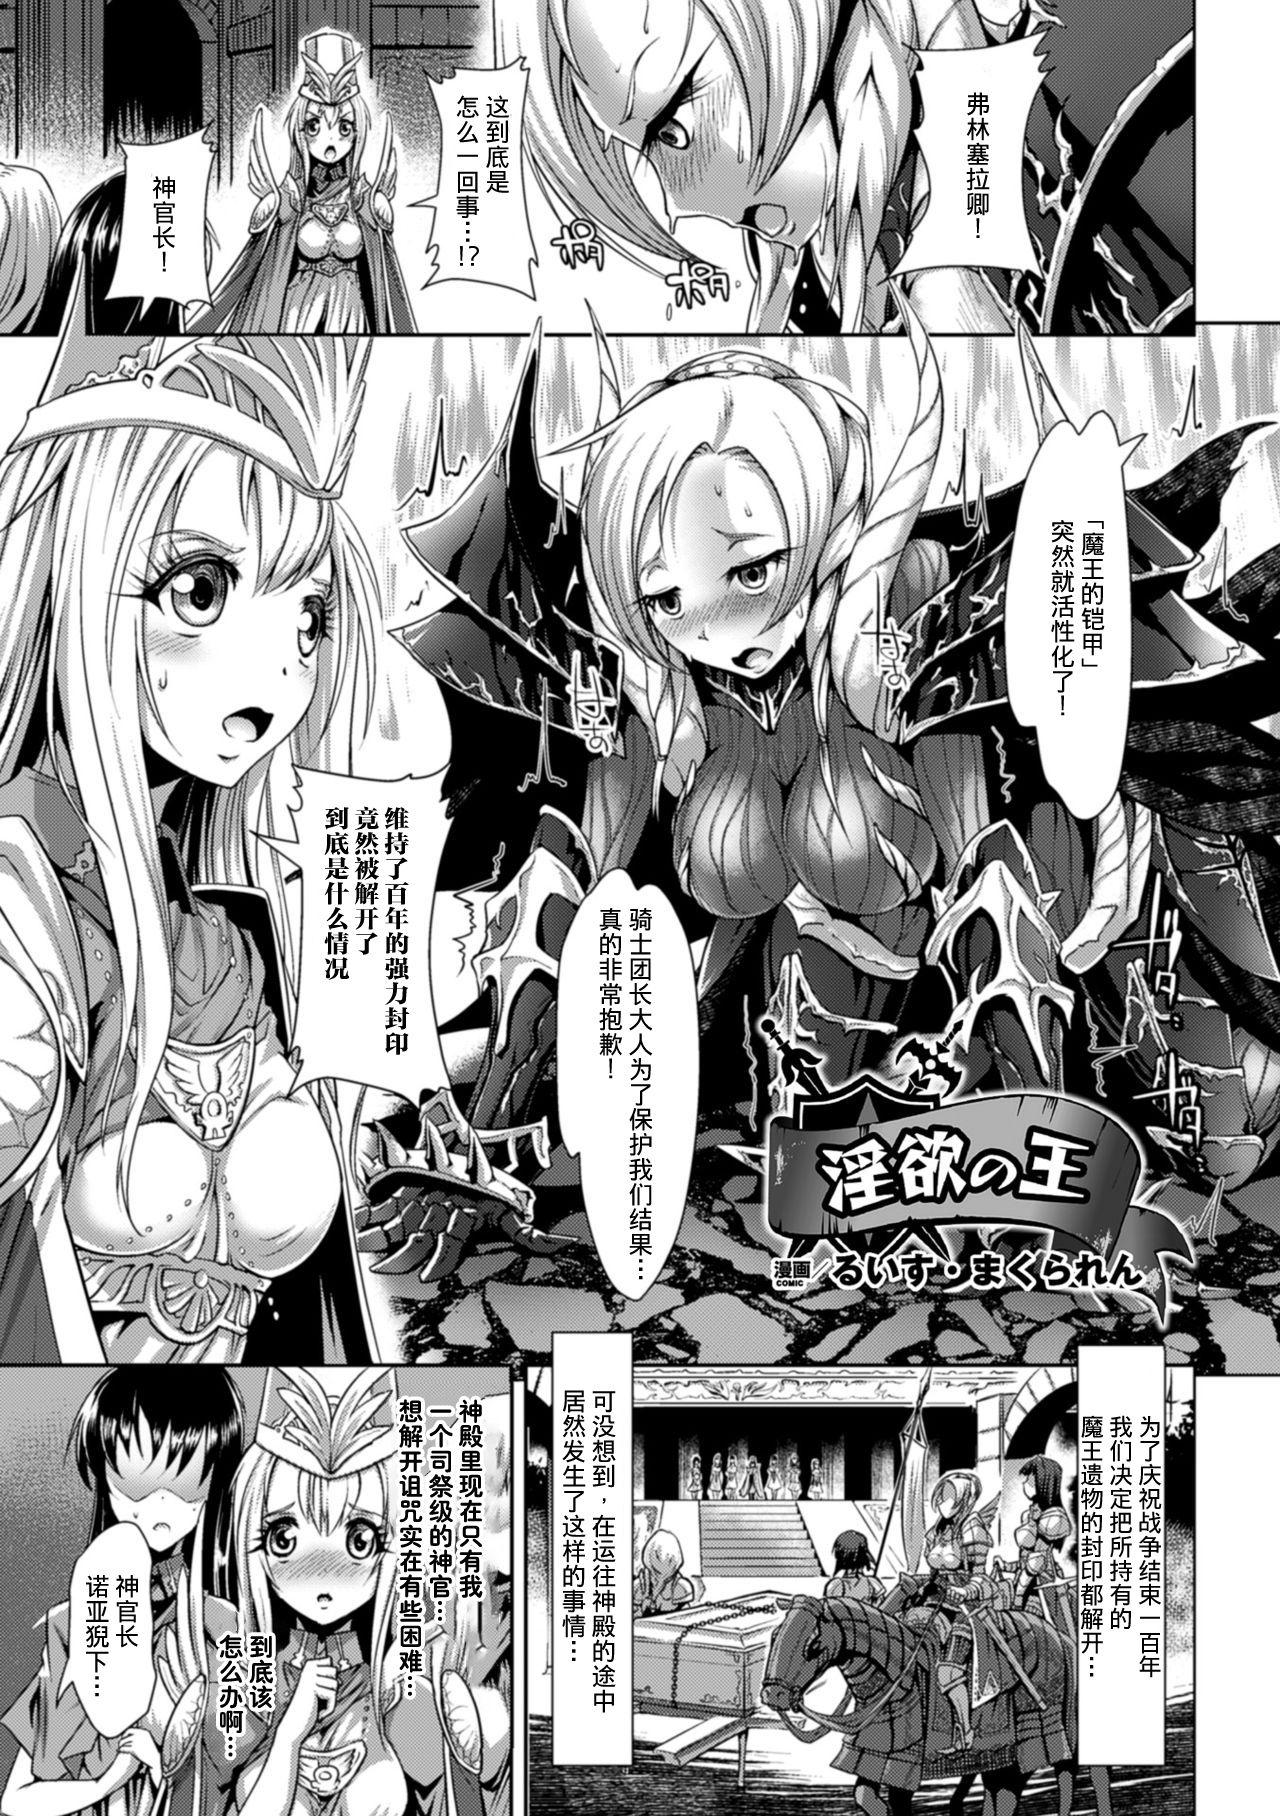 Women Sucking Dick Inyoku no Ou | The Ruler of Lust Rope - Page 1